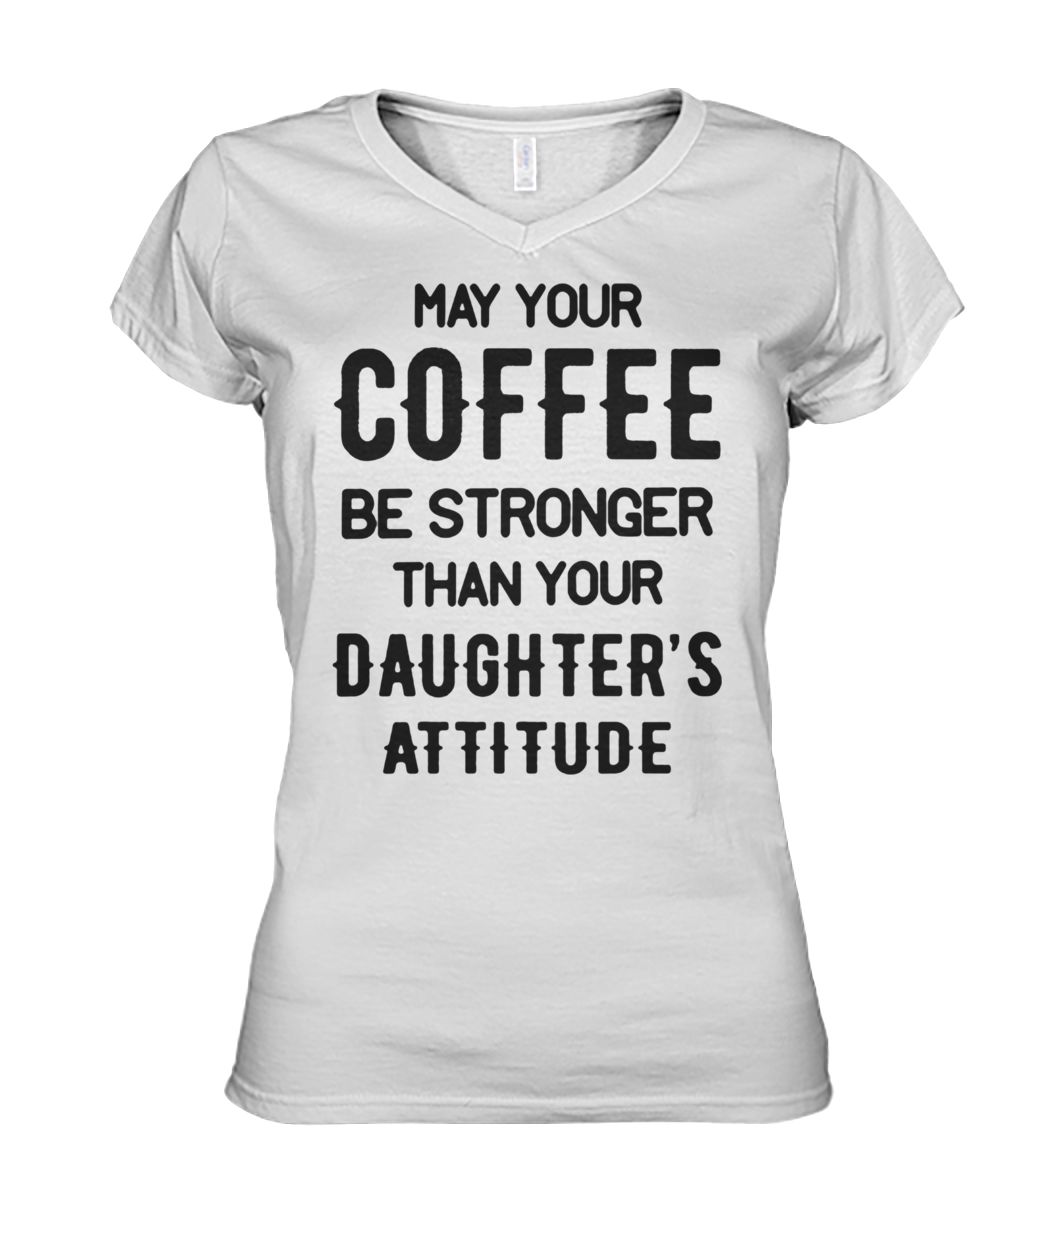 May your coffee be stronger than your daughter's attitude women's v-neck